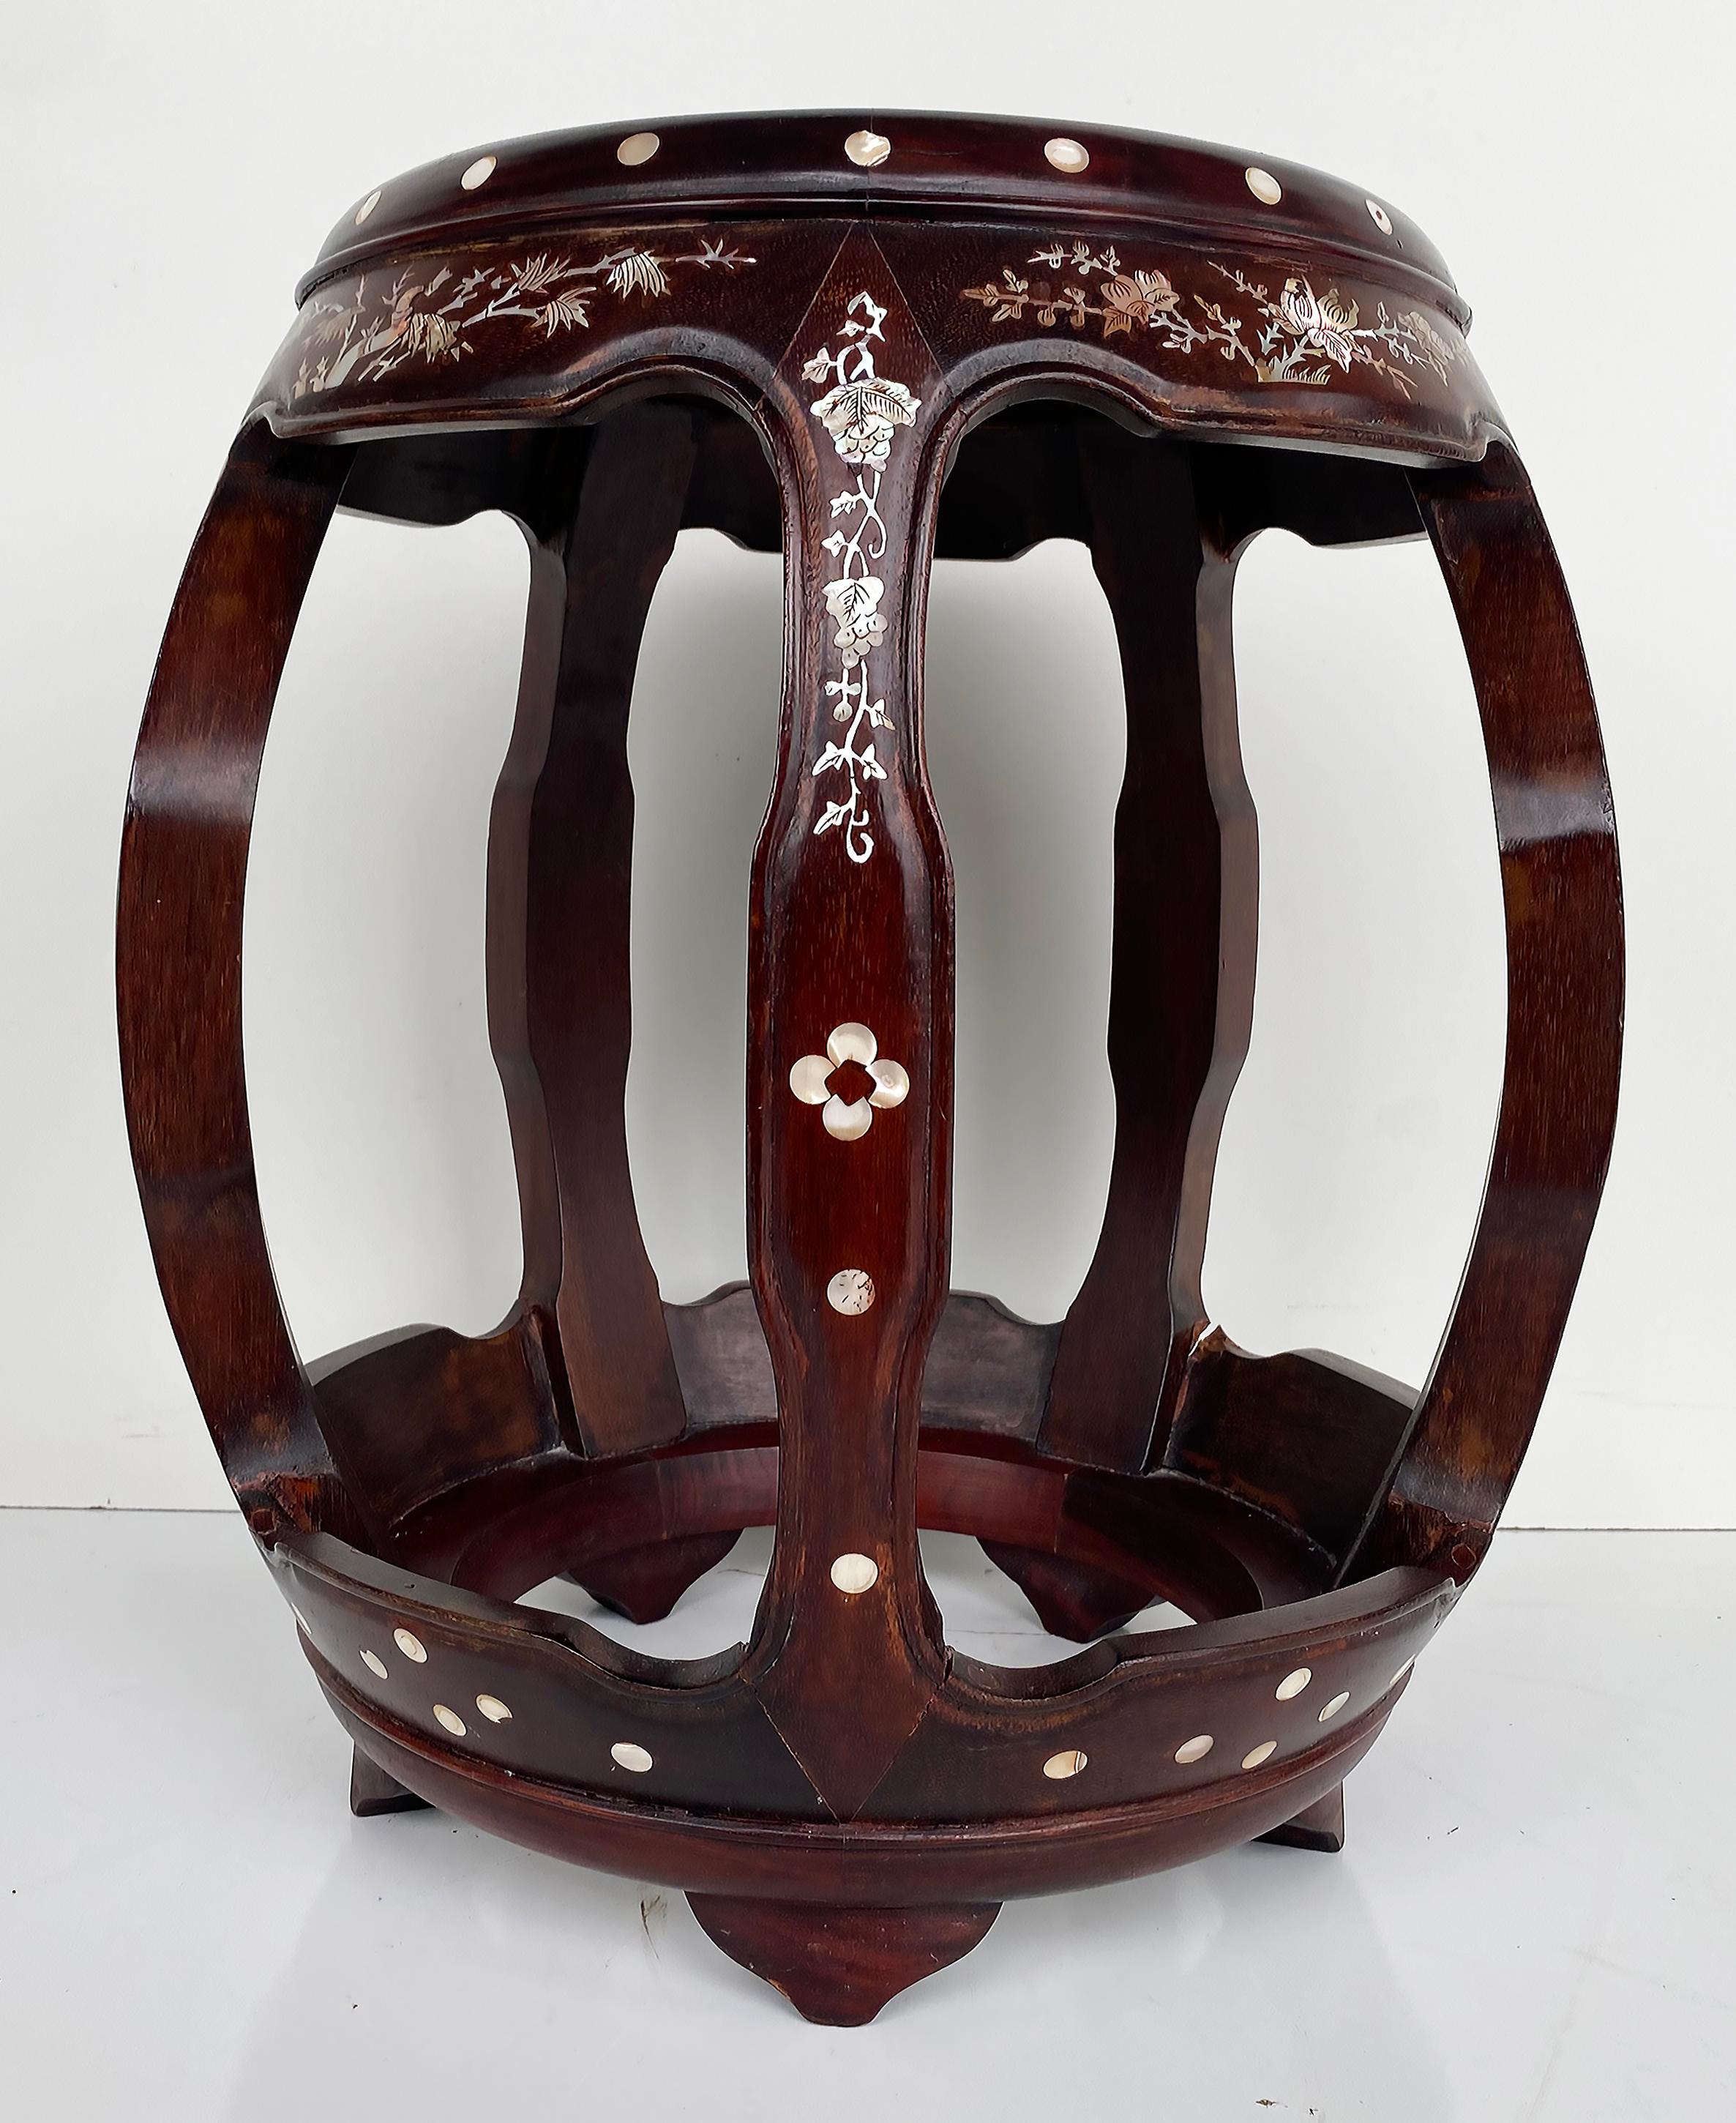 Chinese Mother of Pearl Inlaid Round Wood Drum Side Table

Offered for sale is a Chinese mother of pearl finely and intricately inlaid round wood drum table.  The matching corner chair which is shown in the last photo is offered in a separate